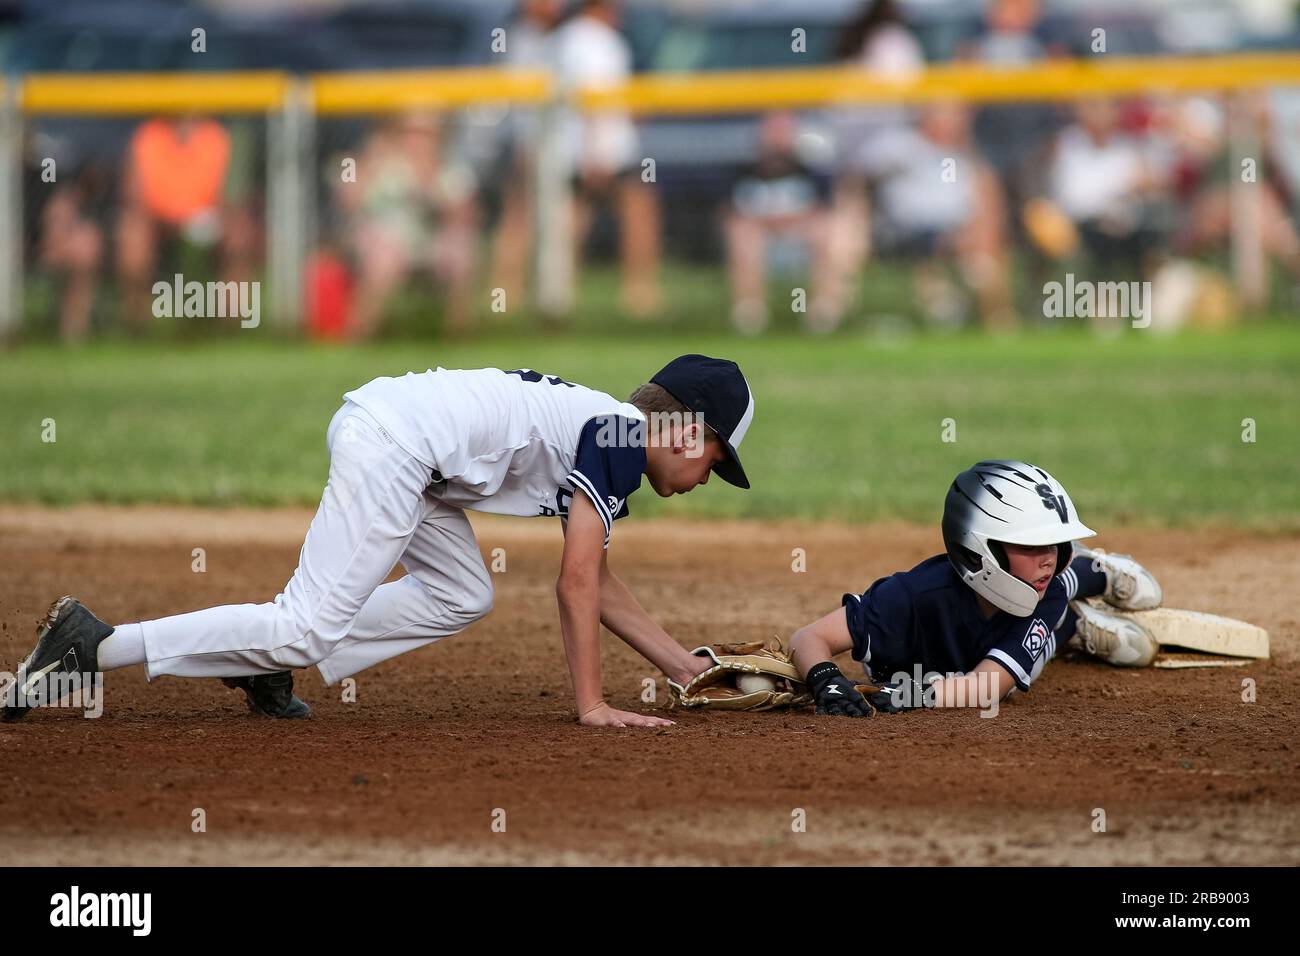 Little League Baseball Game. Editorial Stock Image - Image of competition,  athletes: 110946894